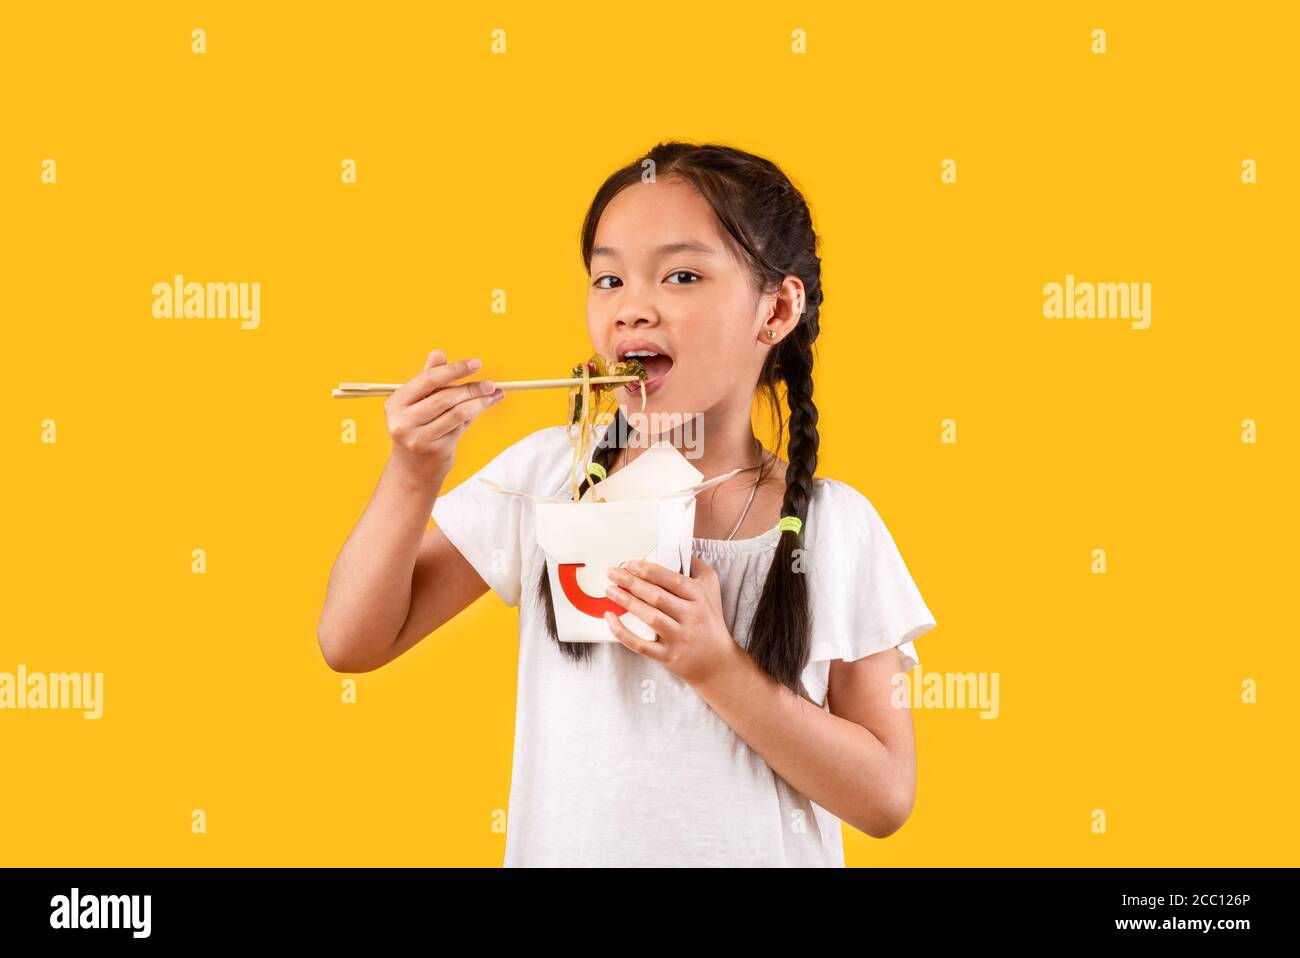 Chinese Girl Eating Noodles With Chopsticks Holding Box, Yellow Background Stock Photo